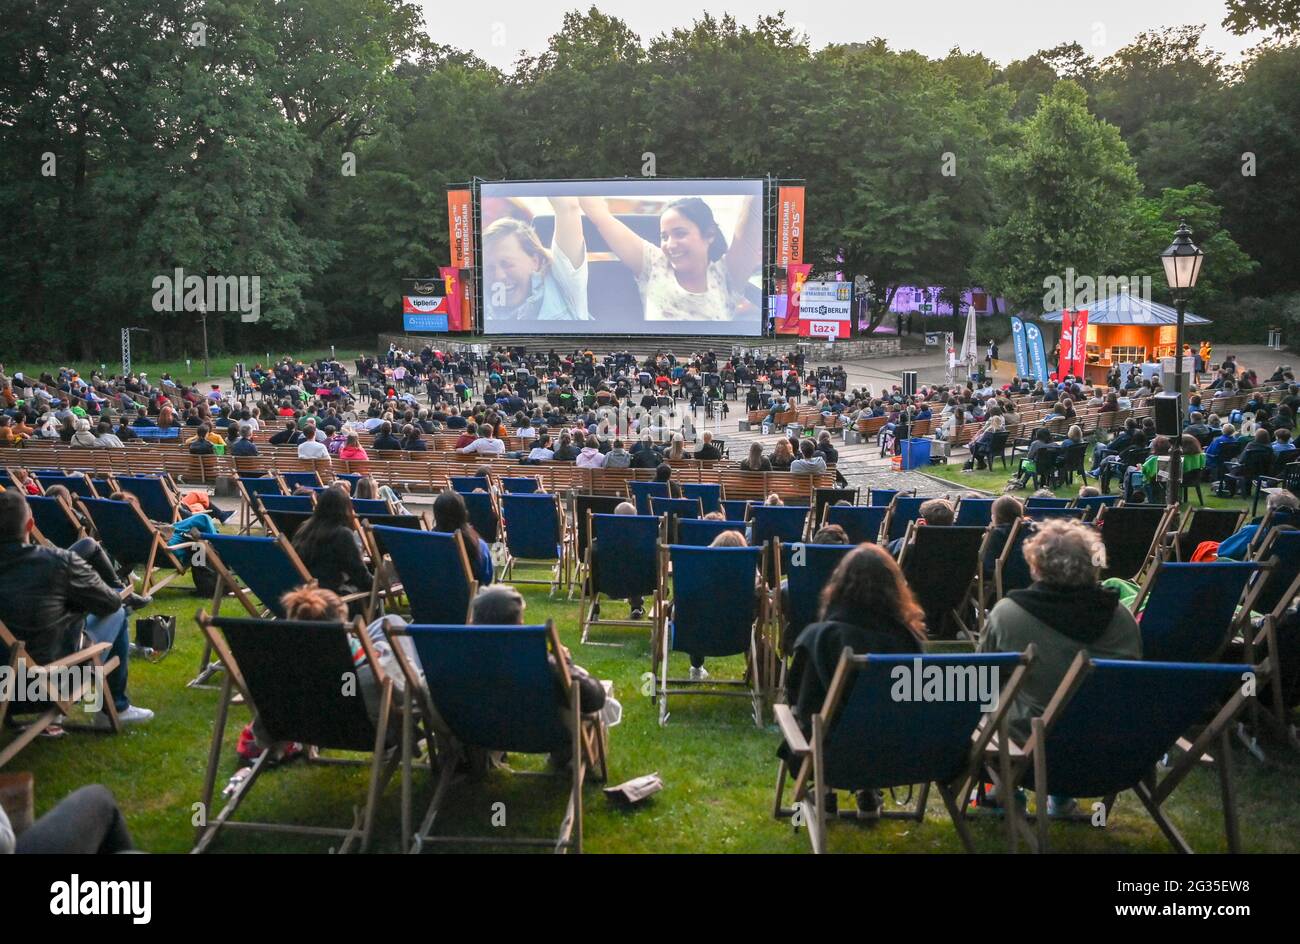 Berlin, Germany. 13th June, 2021. Numerous audience members sit during a late-night screening at the Friedrichshain open-air cinema during the premiere of 'The World Will Be a Different Place' of the Panorama section at the 71st International Film Festival. Following a digital format in March, the Berlinale opens its summer festival to the public. Credit: Jens Kalaene/dpa-Zentralbidl/dpa/Alamy Live News Stock Photo